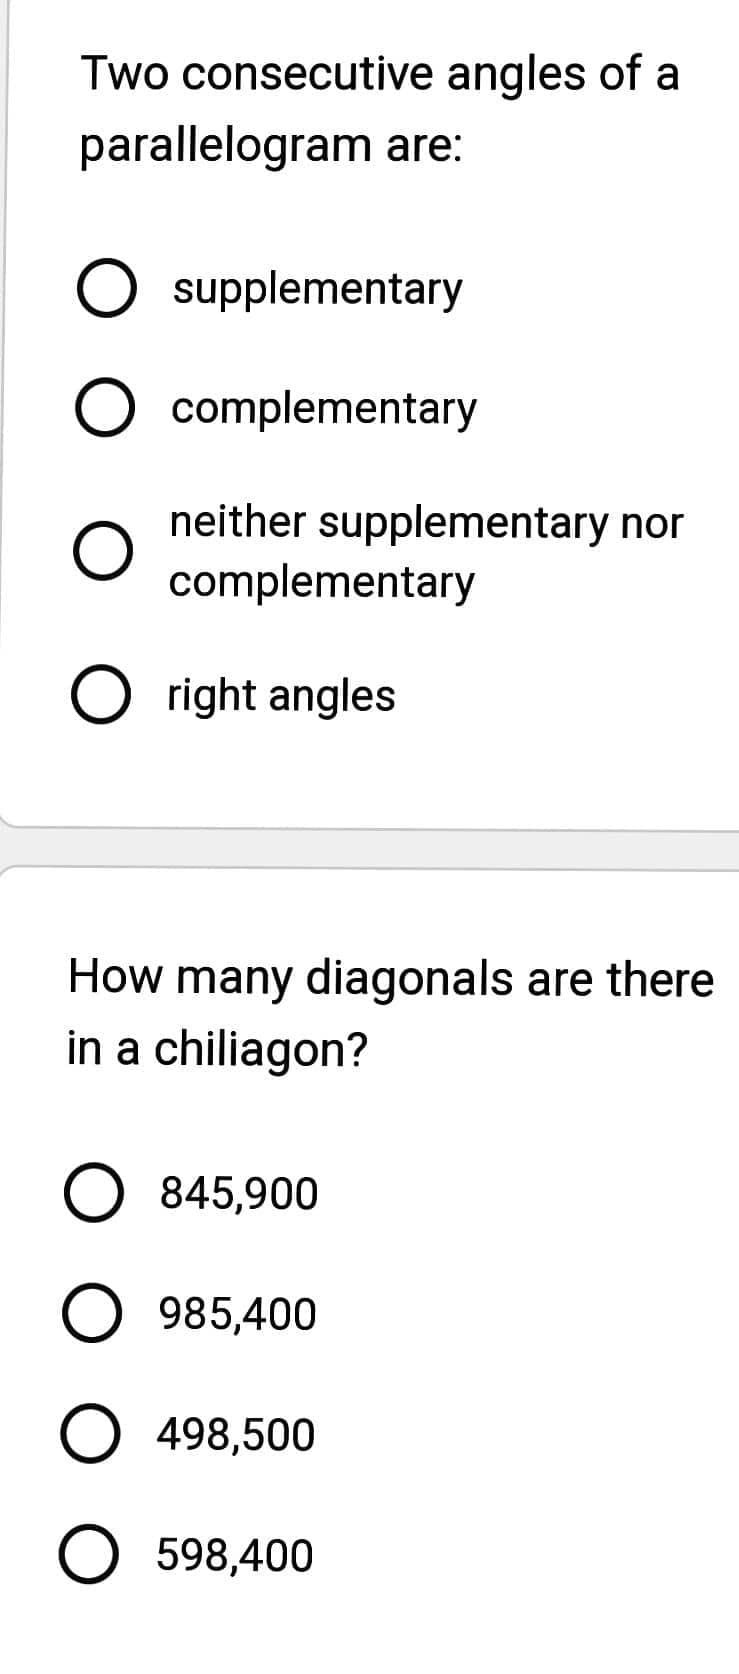 Two consecutive angles of a
parallelogram are:
O supplementary
O complementary
O
neither supplementary nor
complementary
Oright angles
How many diagonals are there
in a chiliagon?
O 845,900
O 985,400
O 498,500
O 598,400